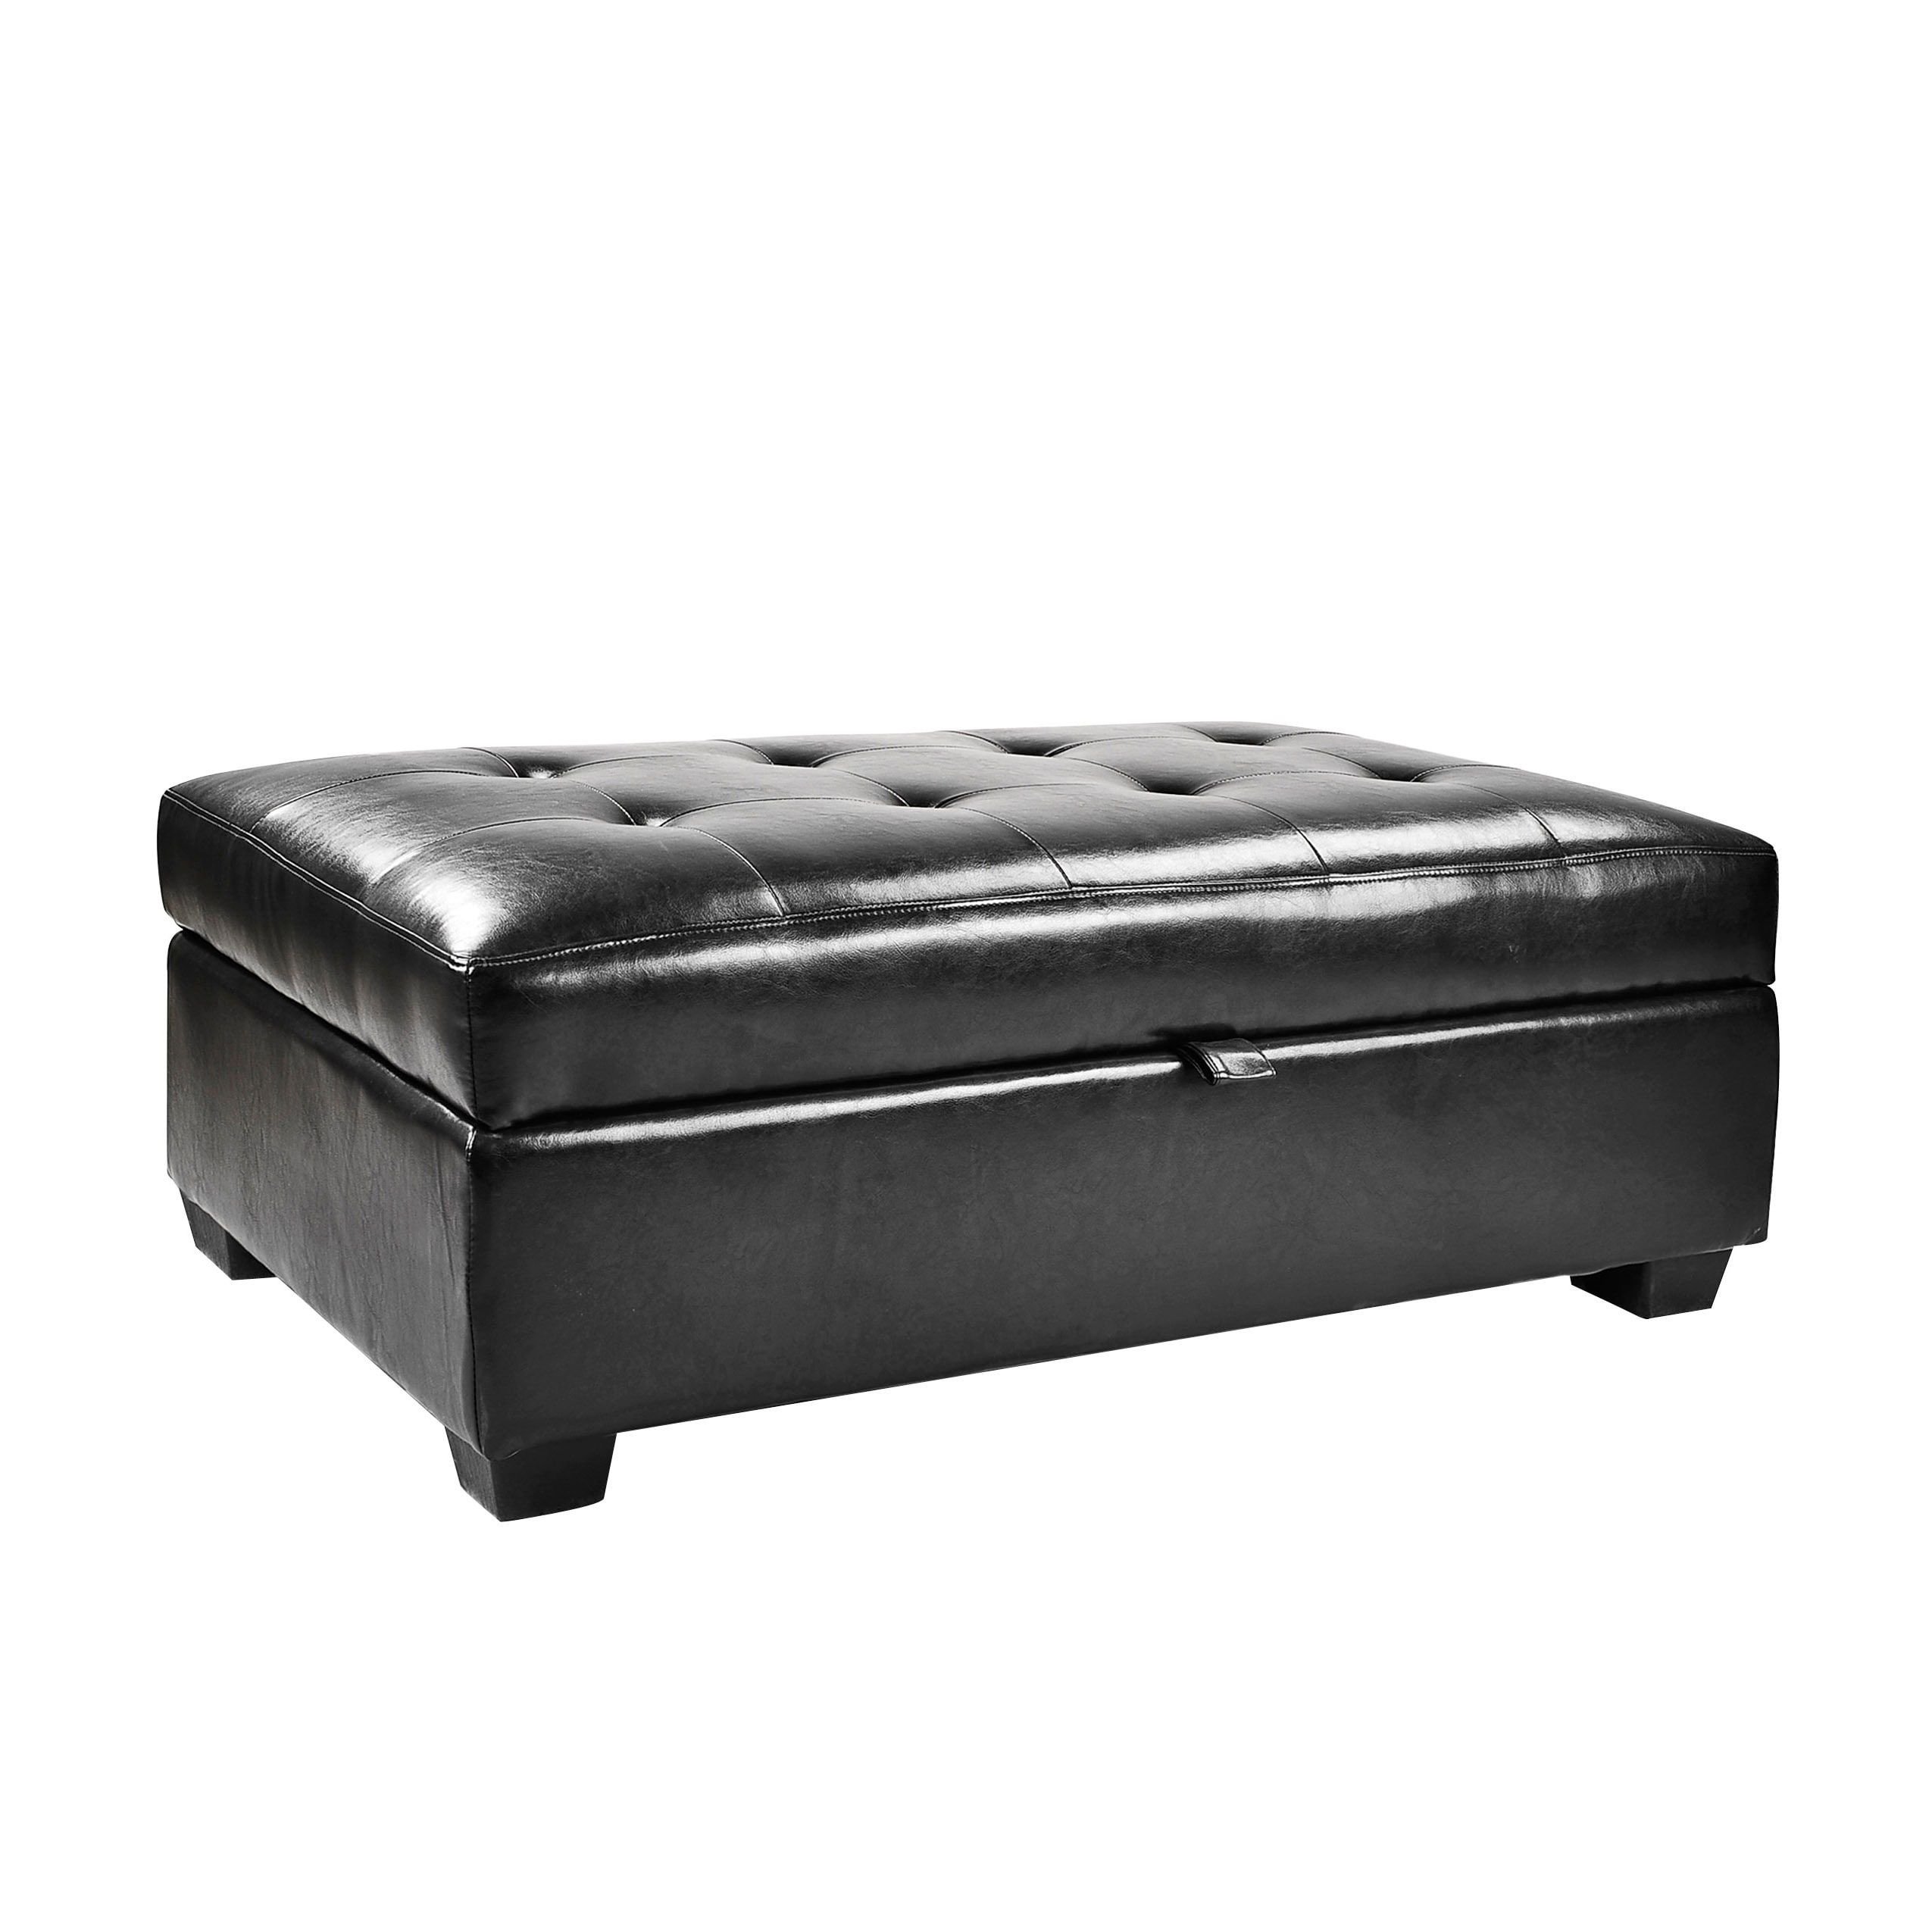 Corliving Antonio Modern Black Faux Leather Storage Ottoman In The Ottomans  & Poufs Department At Lowes Throughout Black Faux Leather Ottomans (View 6 of 15)